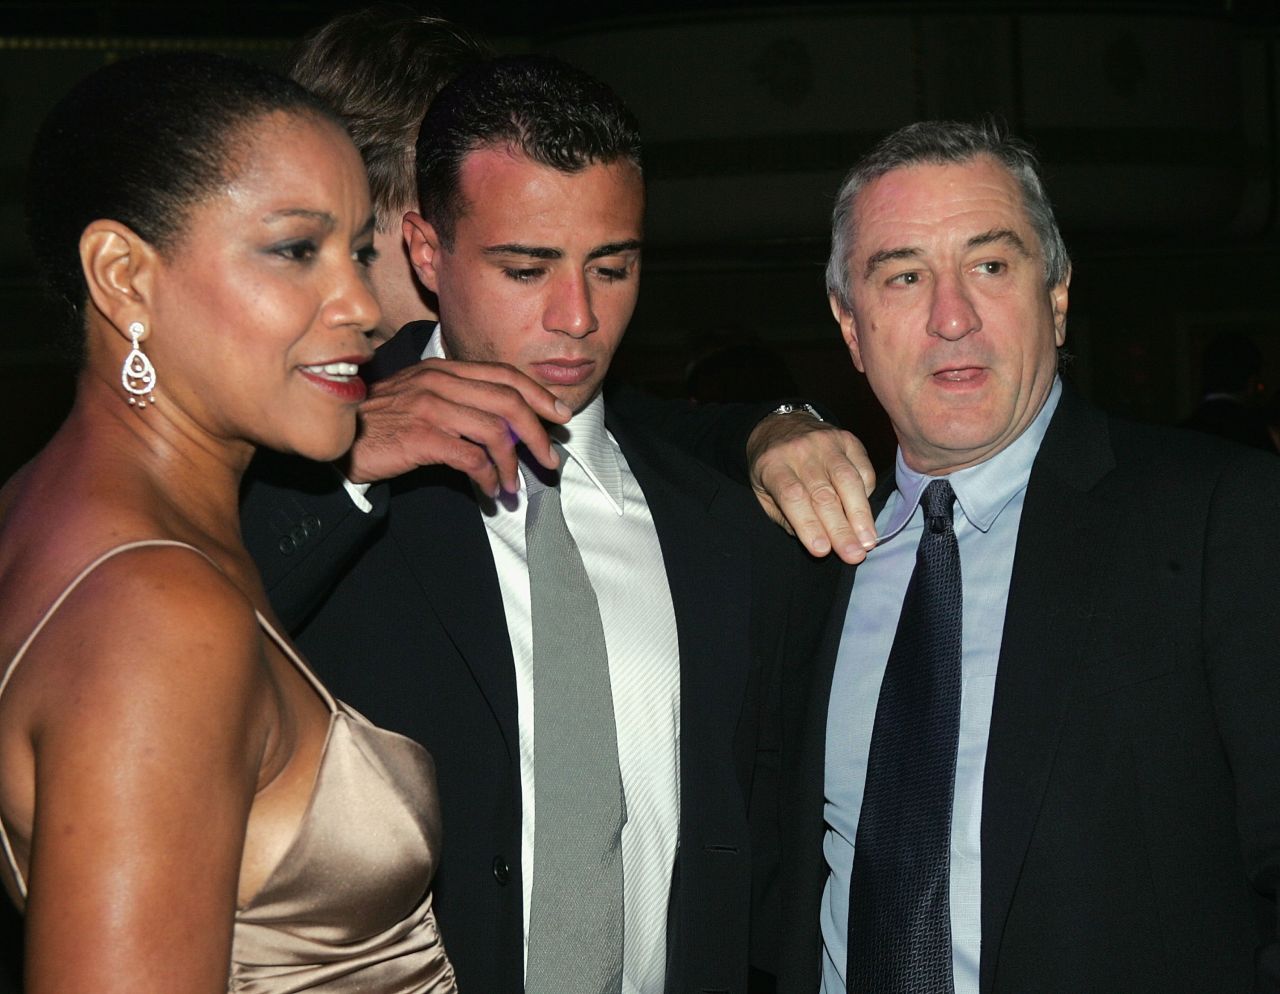 De Niro is joined by his second wife, actress Grace Hightower, and his son Raphael at a 2004 cocktail party for the Directors Guild of America.